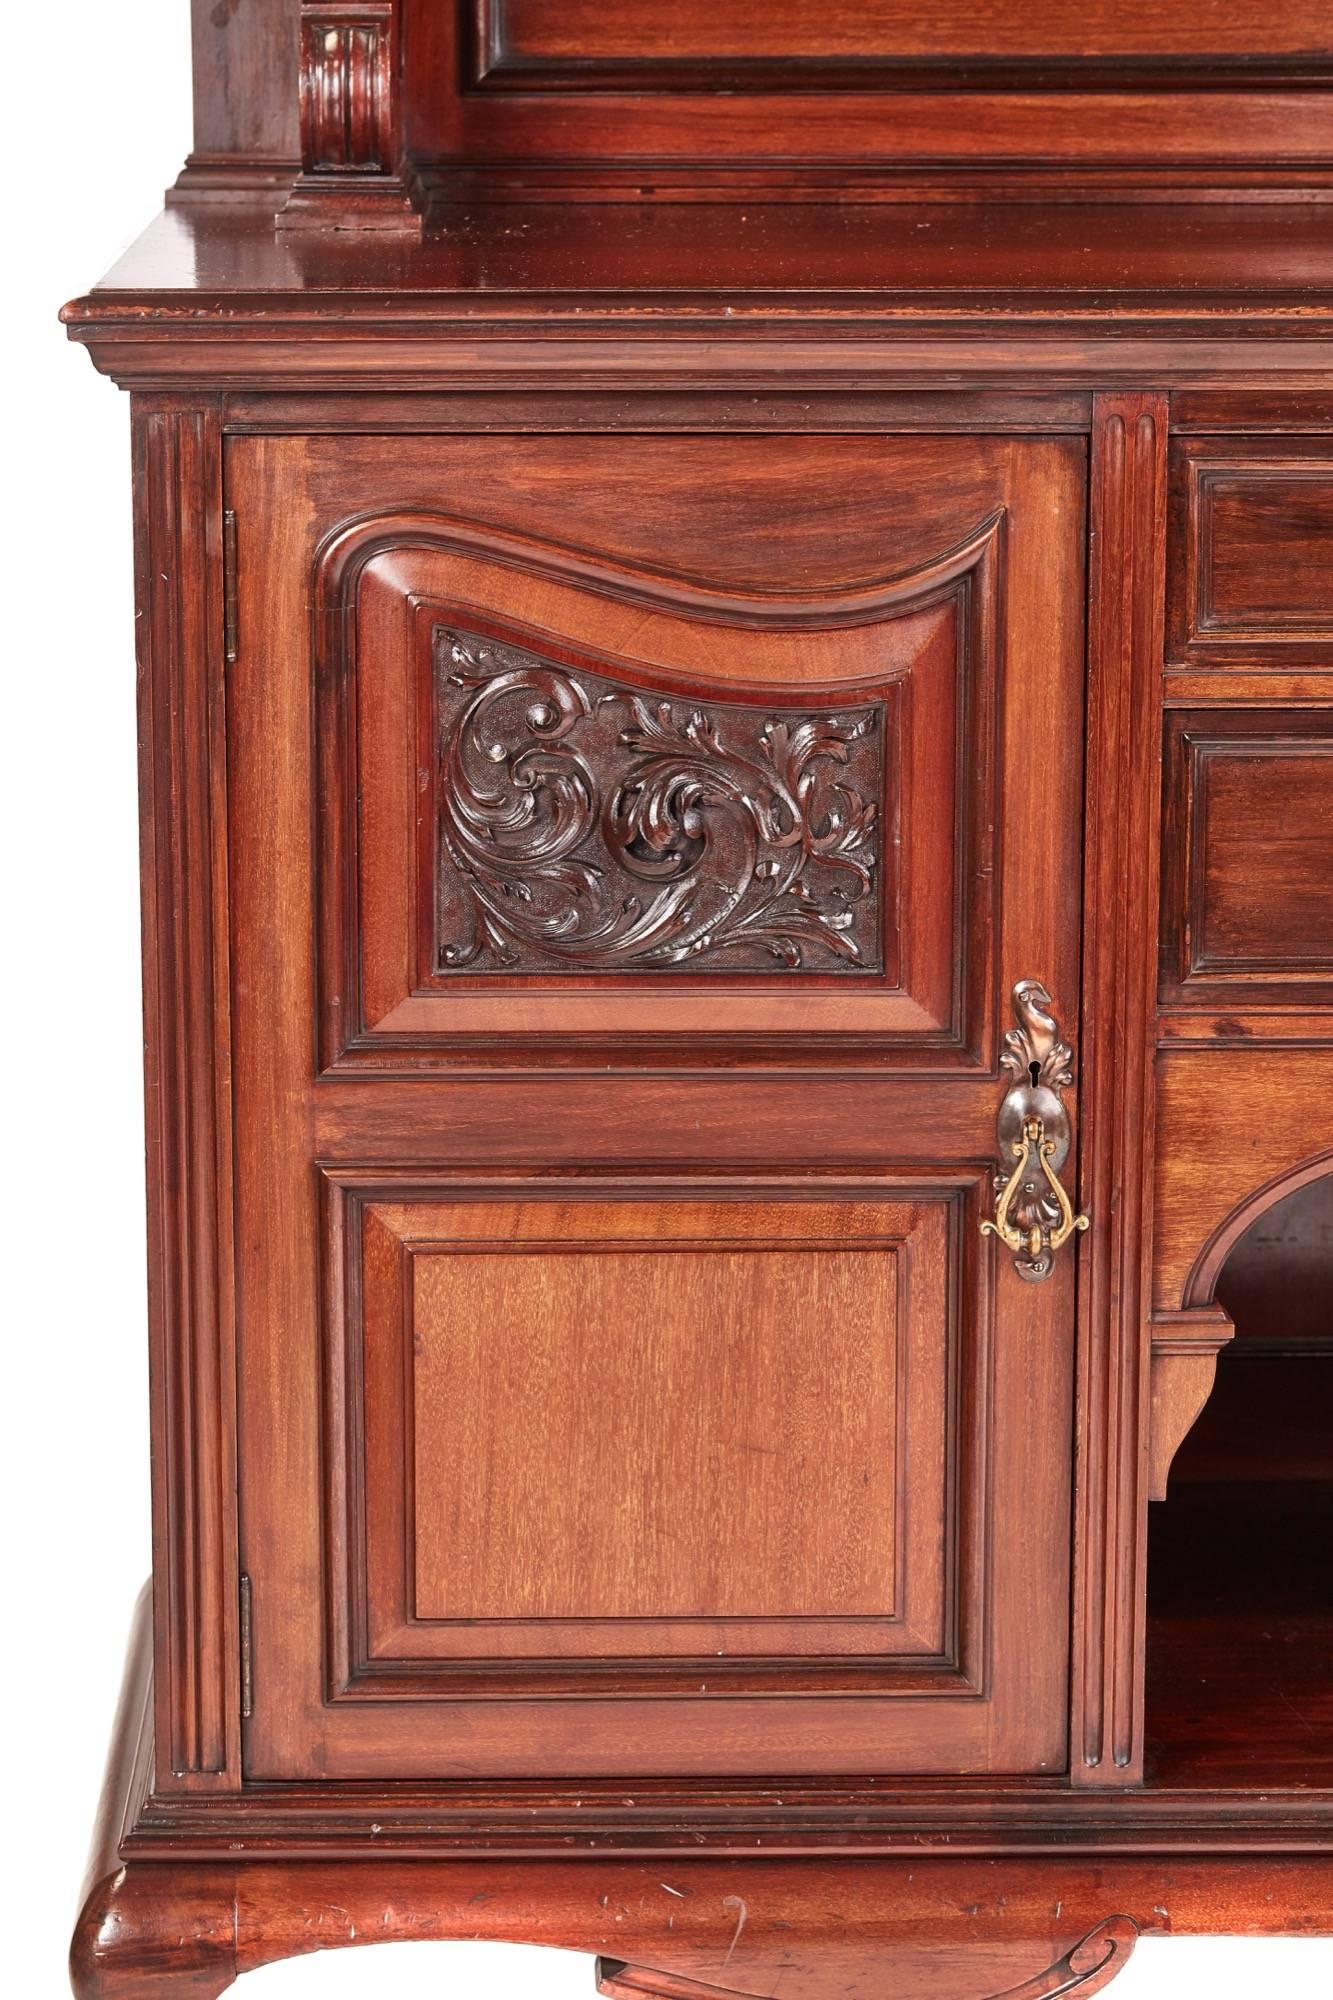 Large quality antique carved mahogany sideboard by Maples, the arched mirrored back with projecting flanking fluted columns, the base with two central drawers and recessed shelf below flanked by pair of carved panelled doors enclosing shelves and